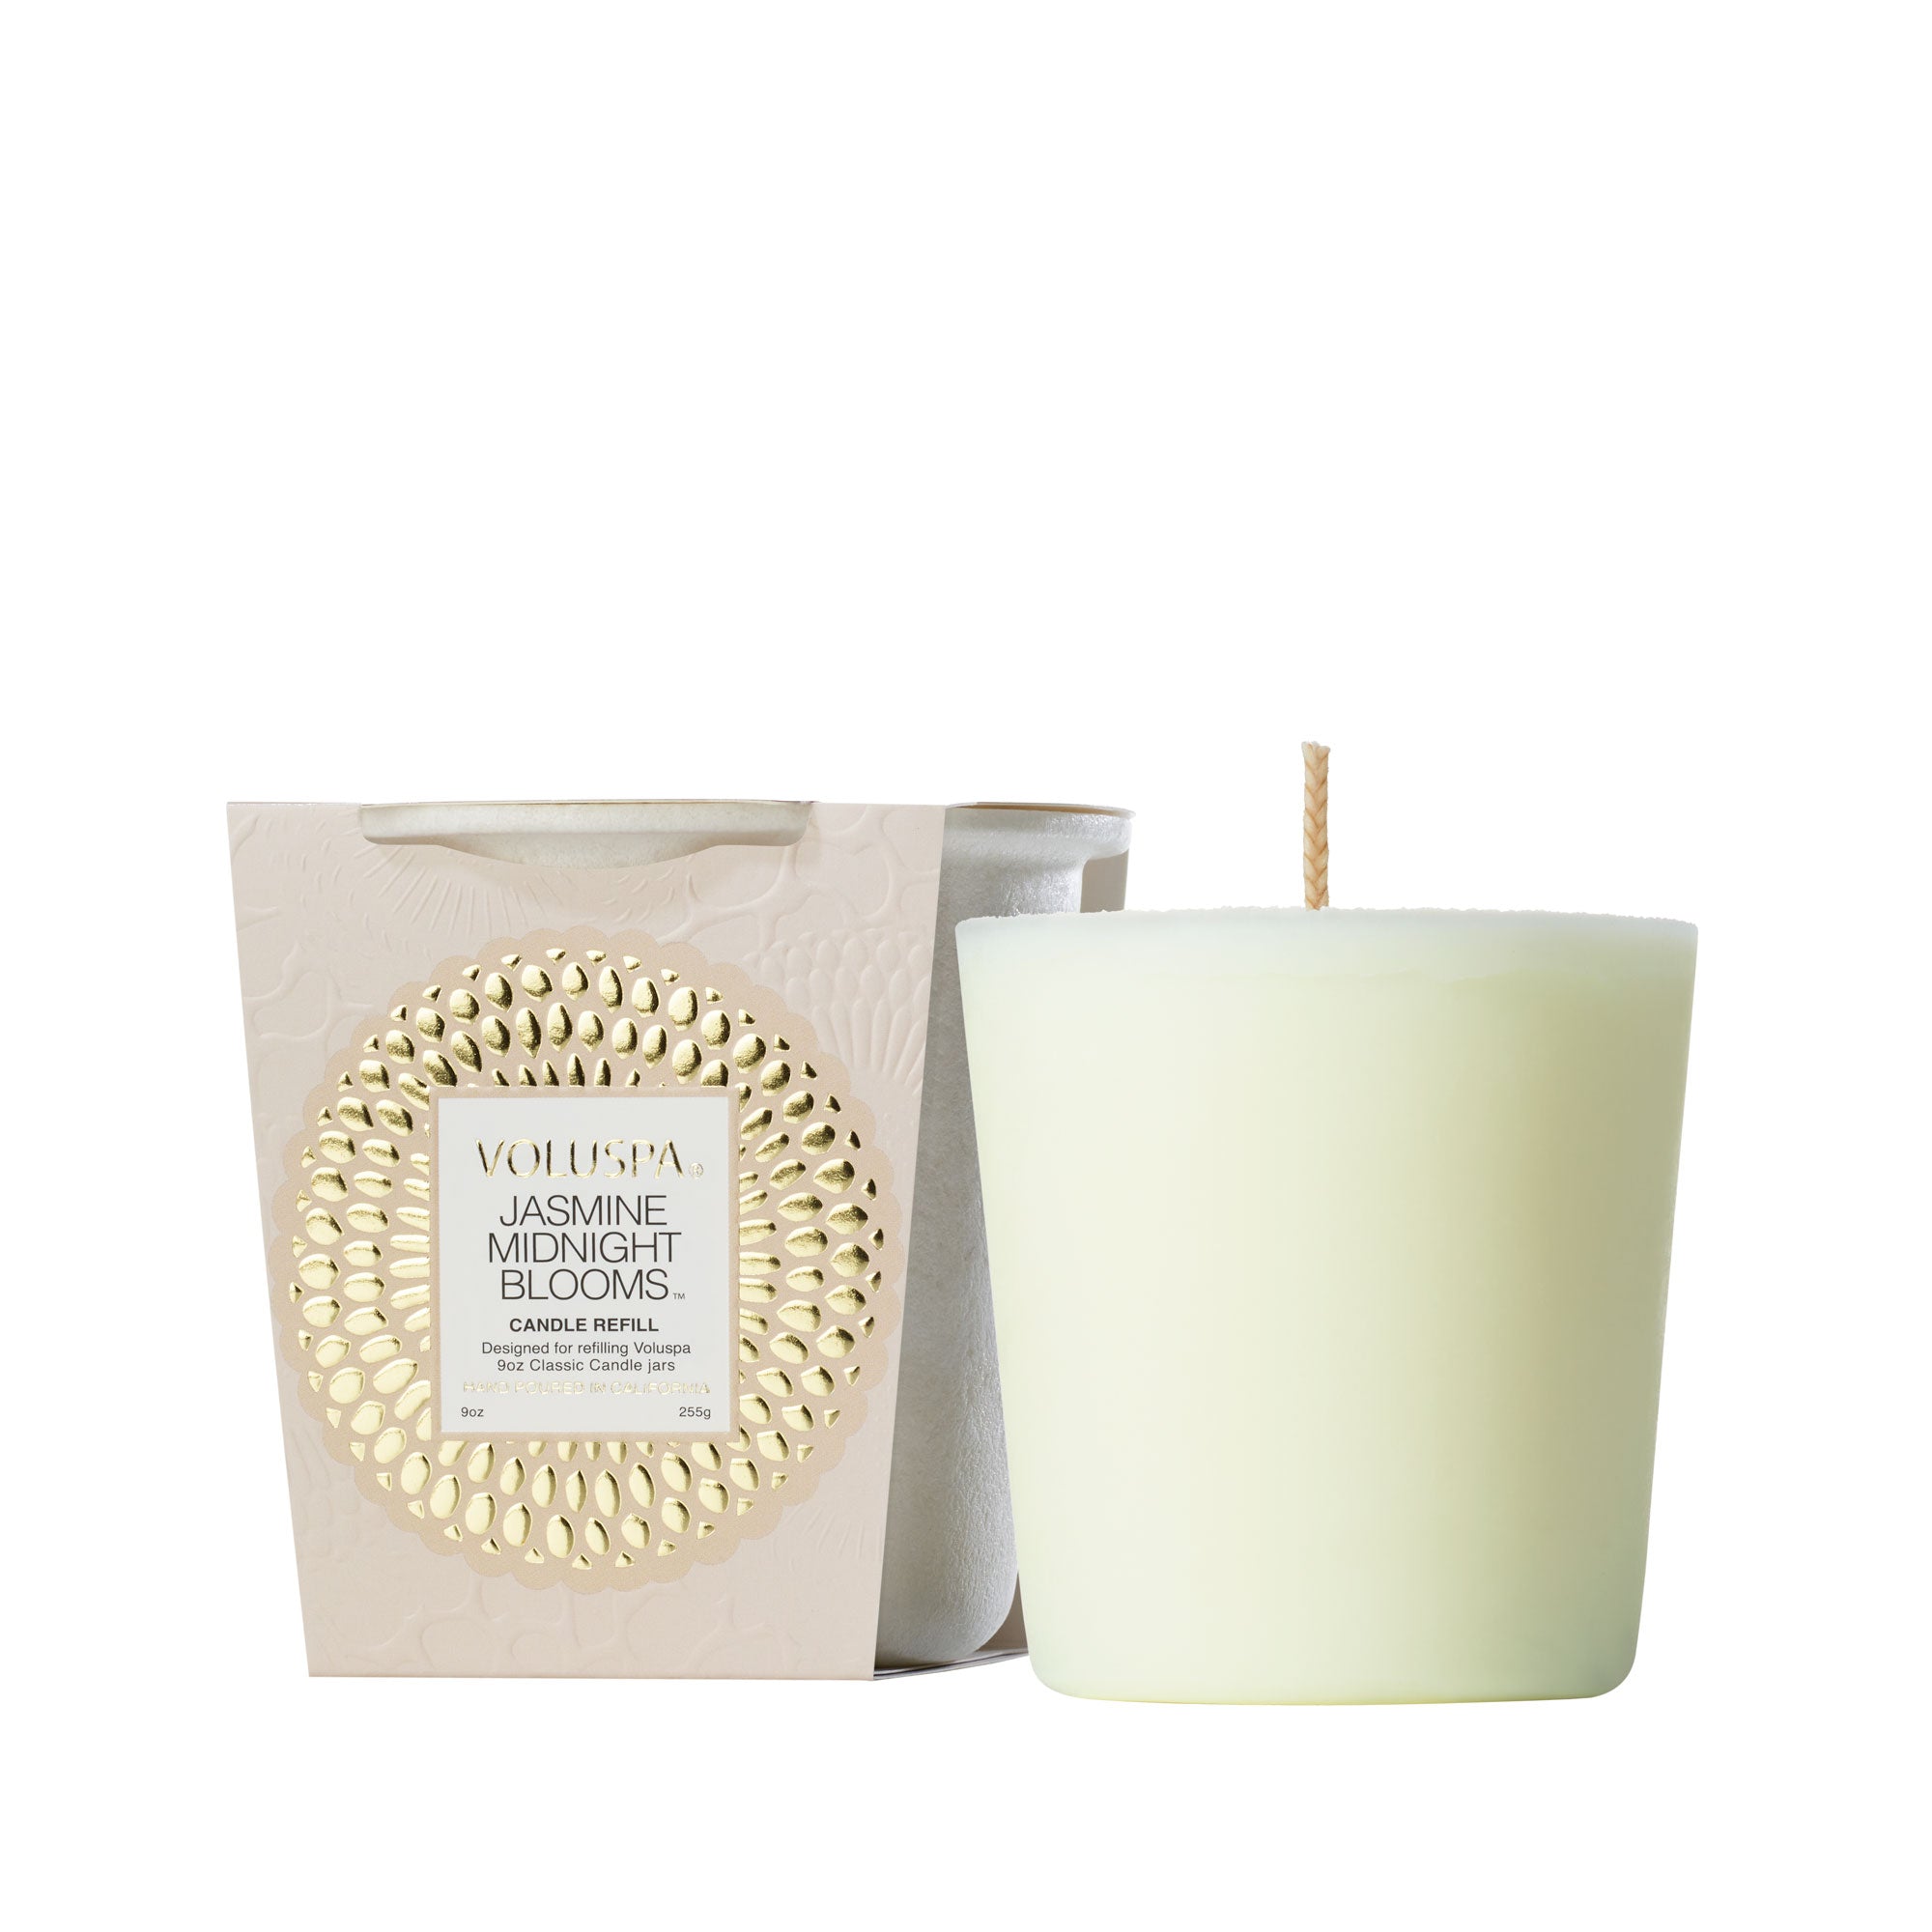 Jasmine Midnight Blooms - Classic Candle Refill